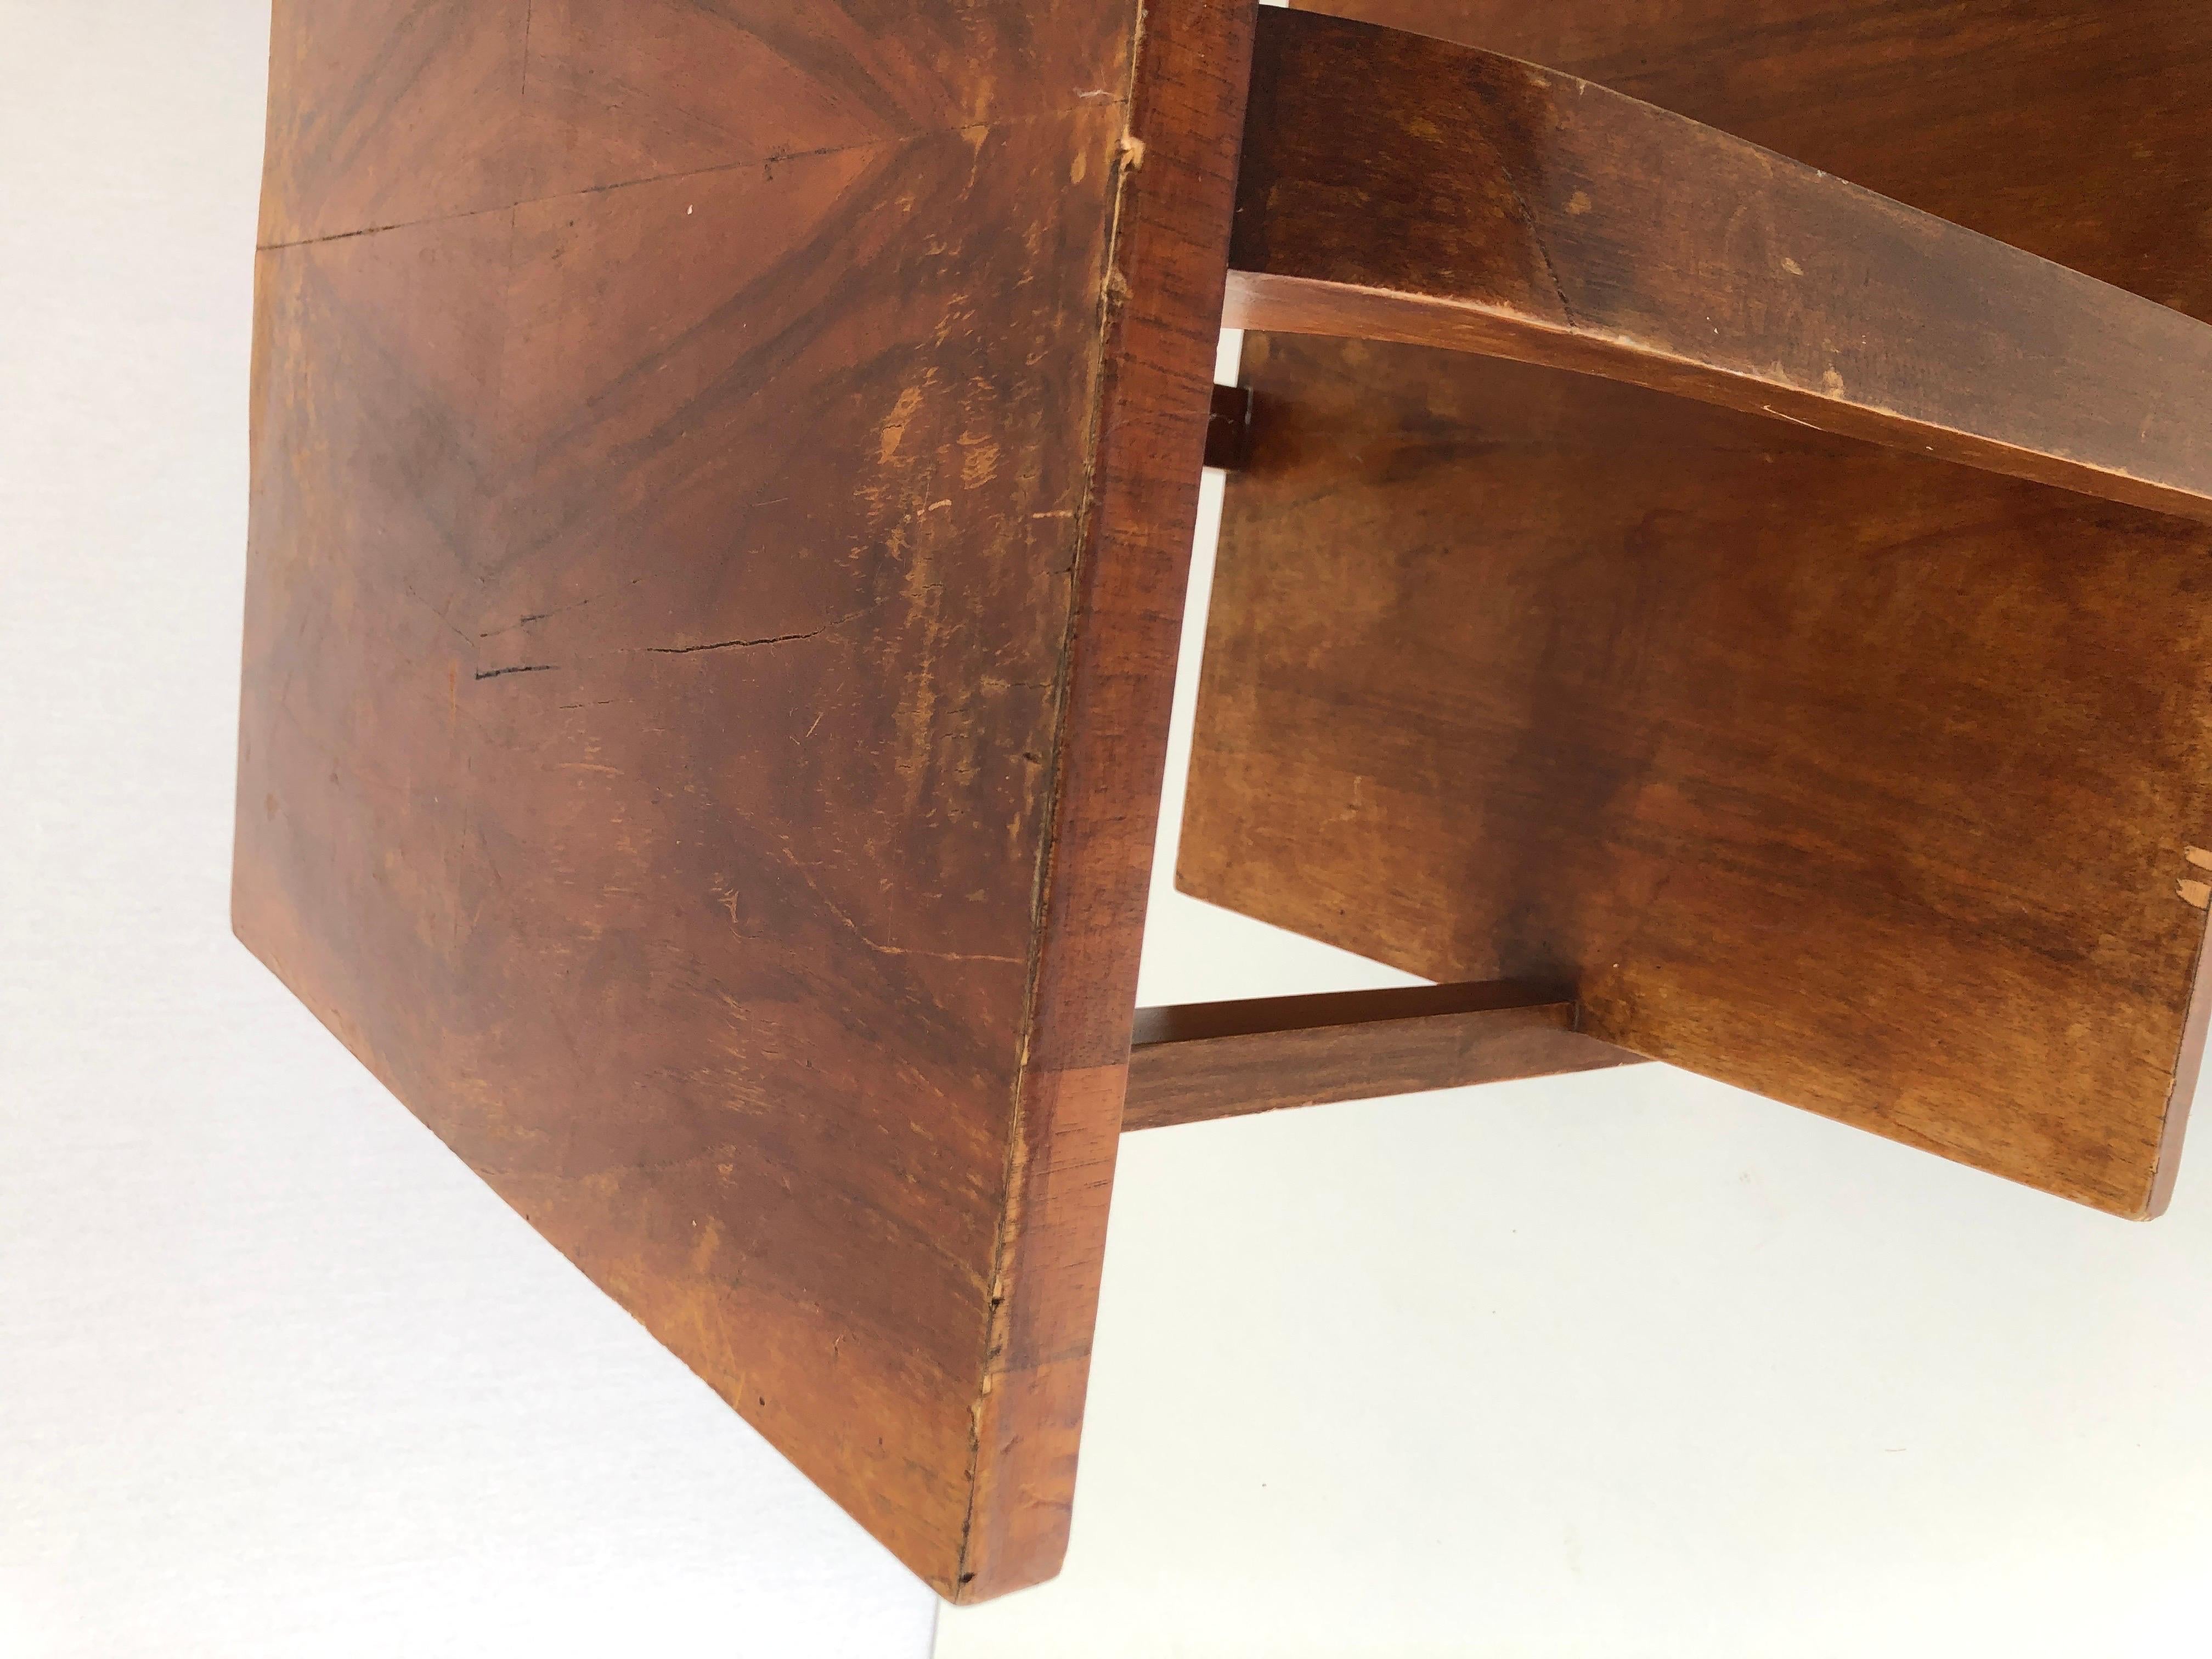 Art Deco Square Wood Corner or End Table, 1940s, Made in Italy For Sale 3